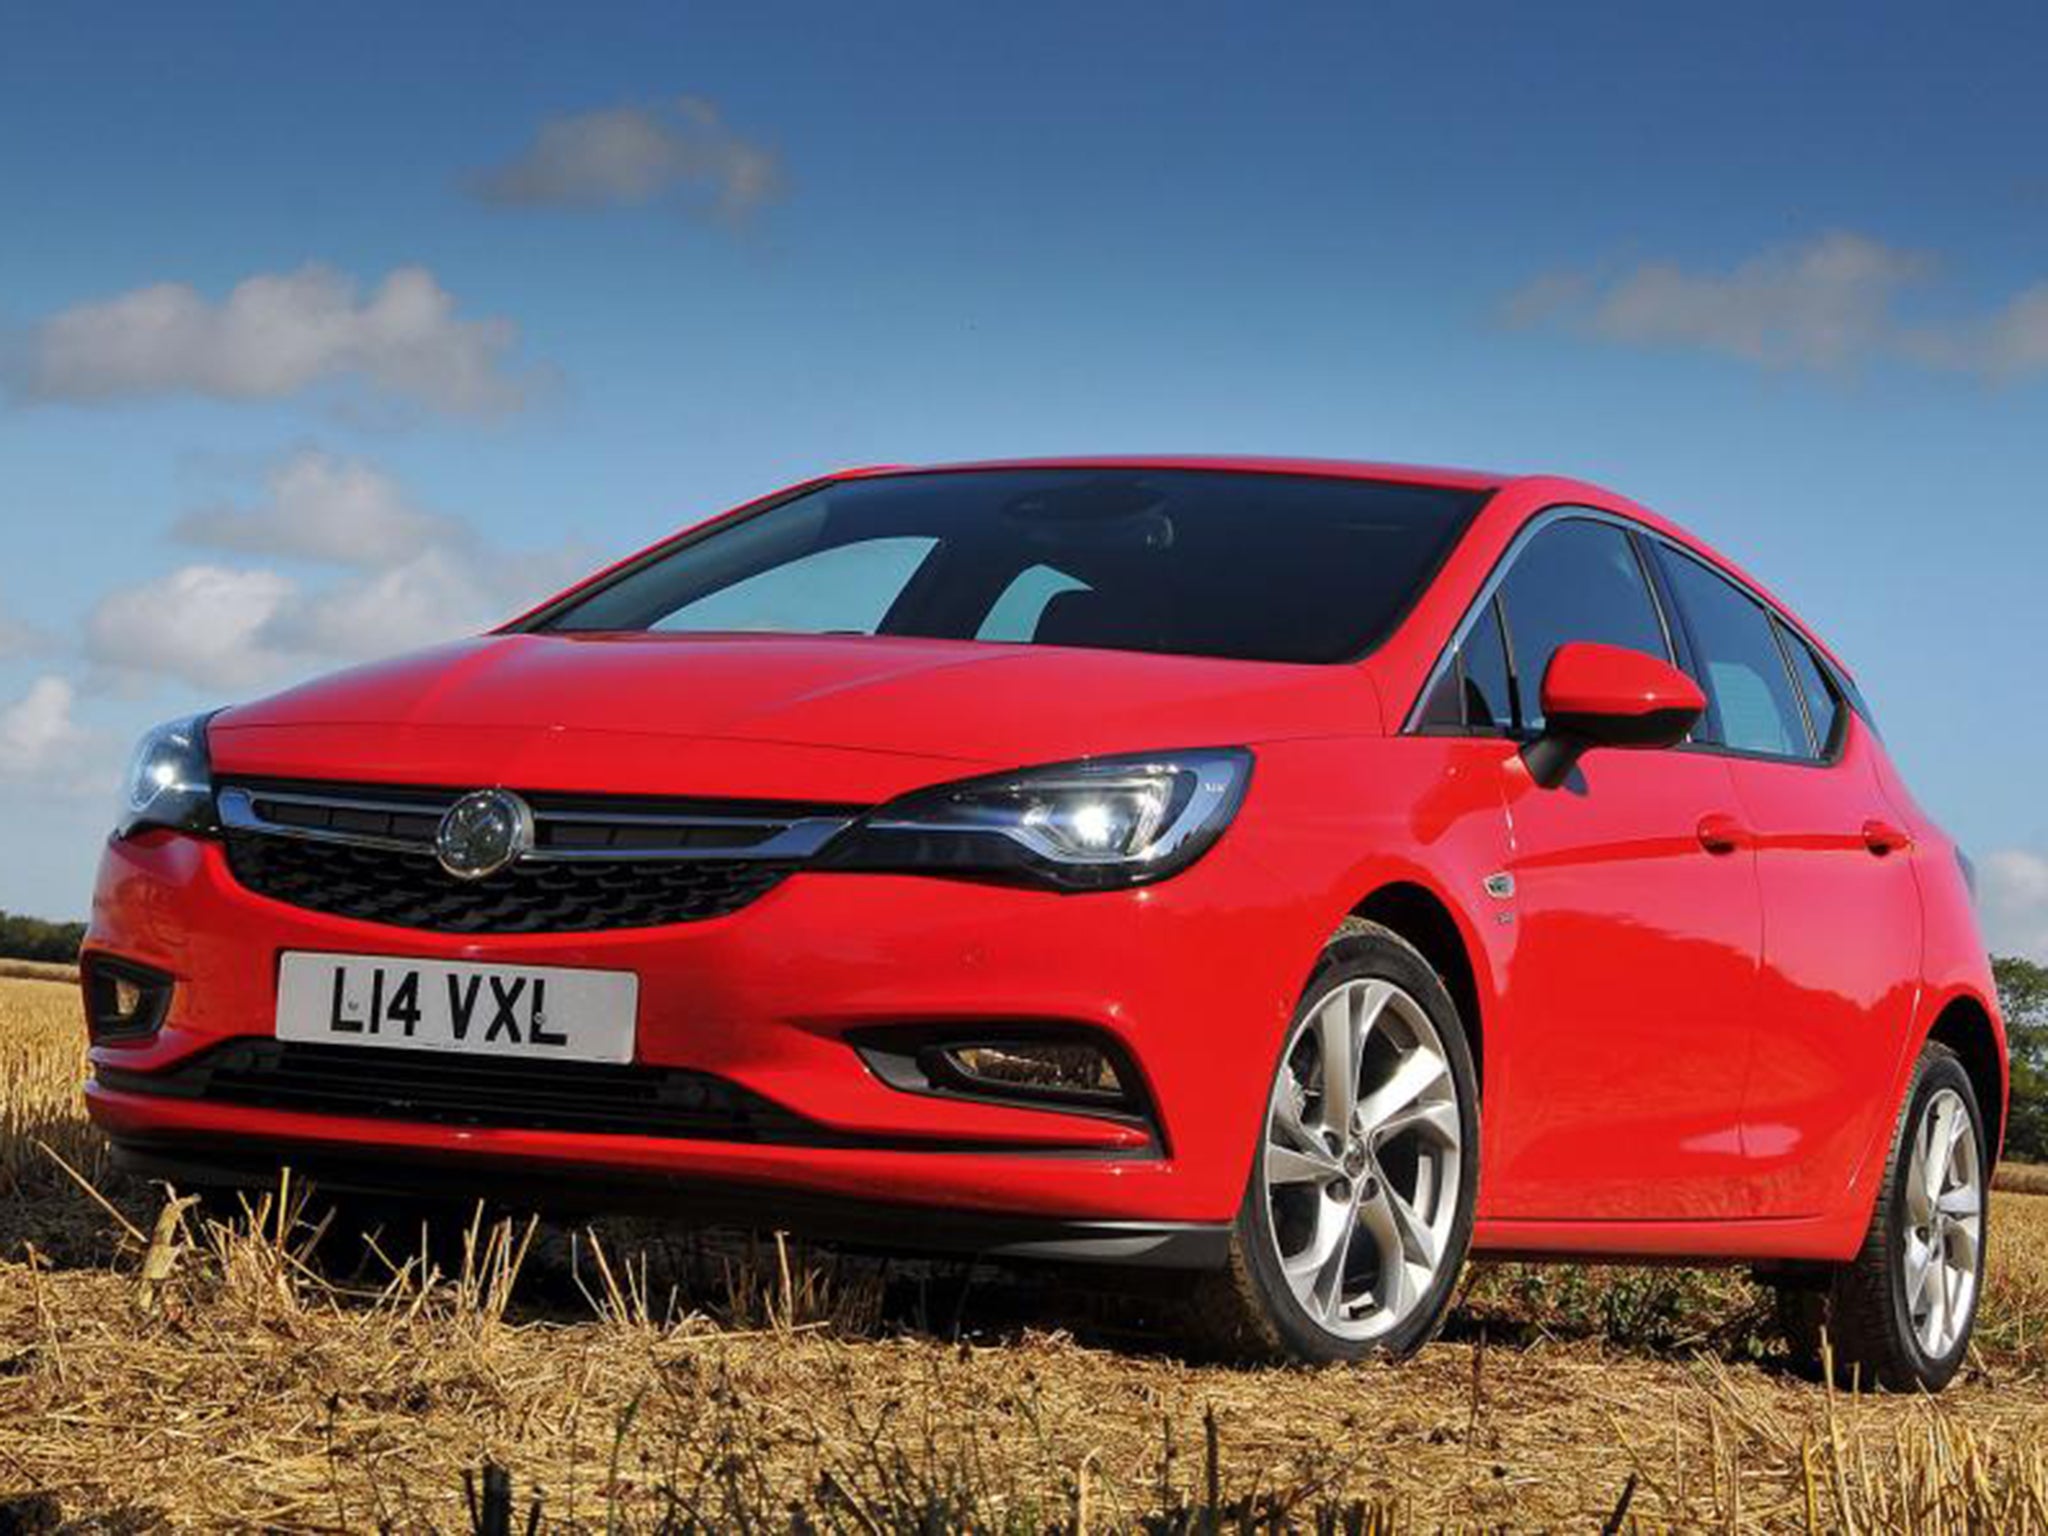 The first vehicle to have its data released in this way will be the new Vauxhall Astra